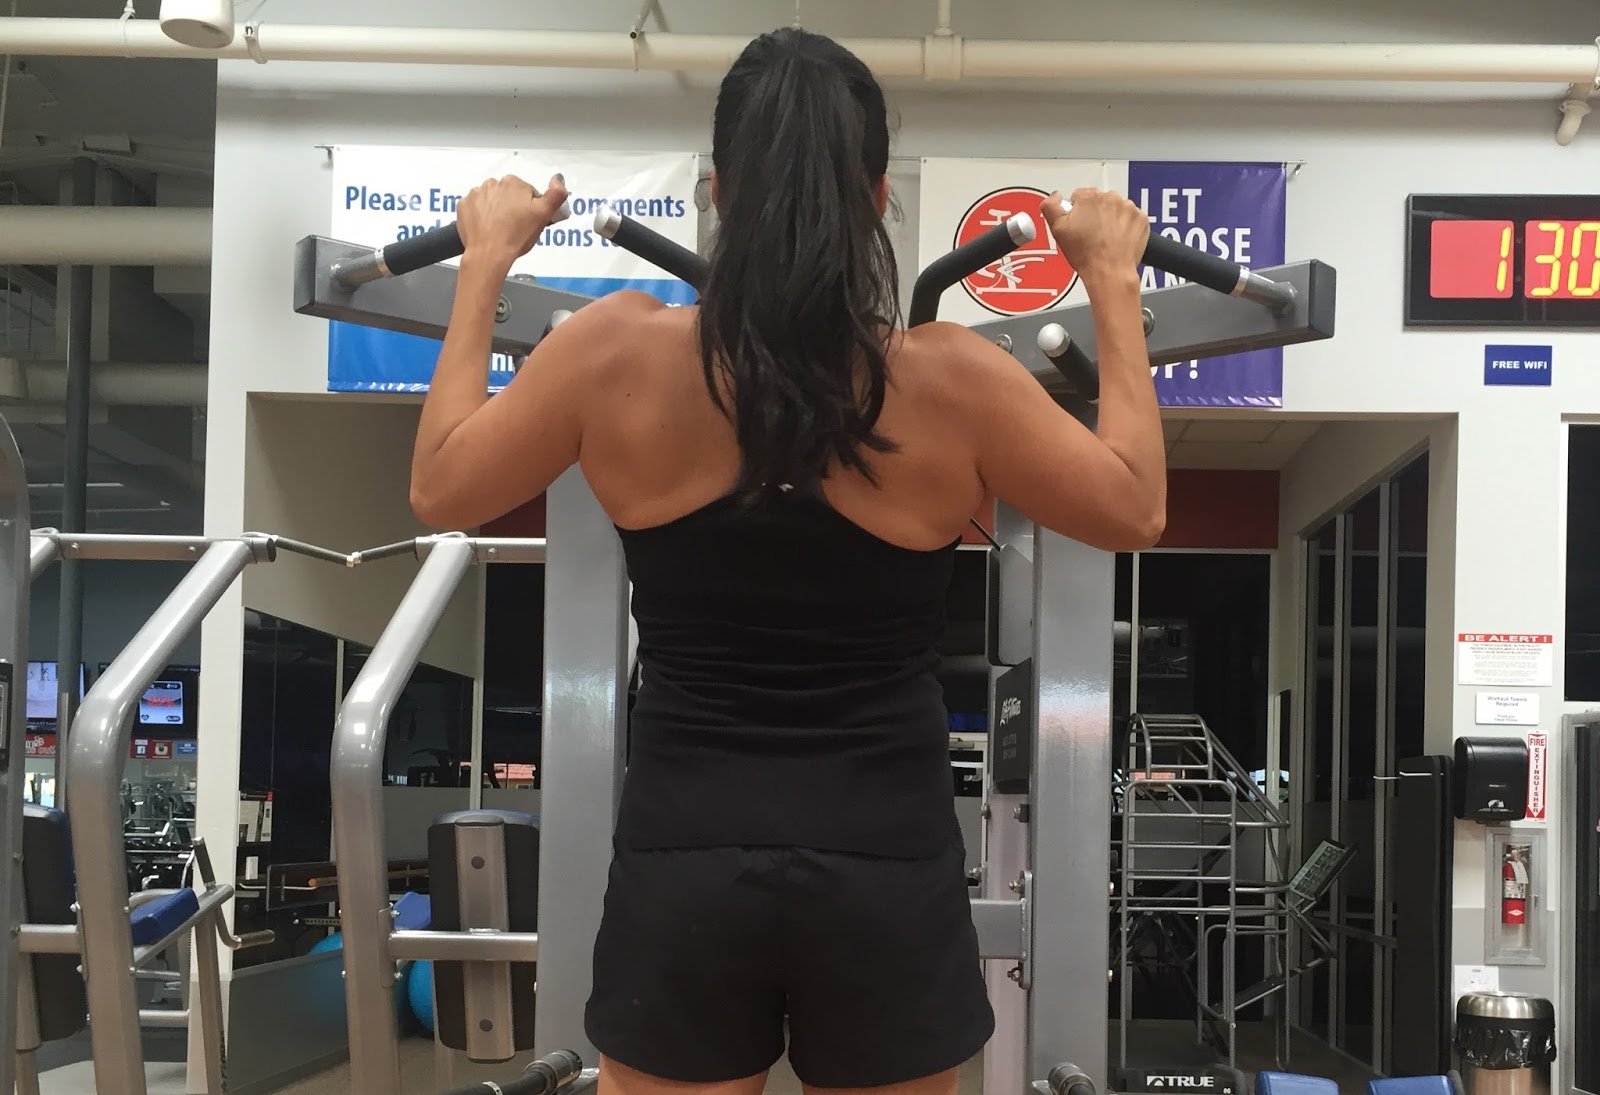 Top 5 Back Exercises and Tips - The Active Habitat